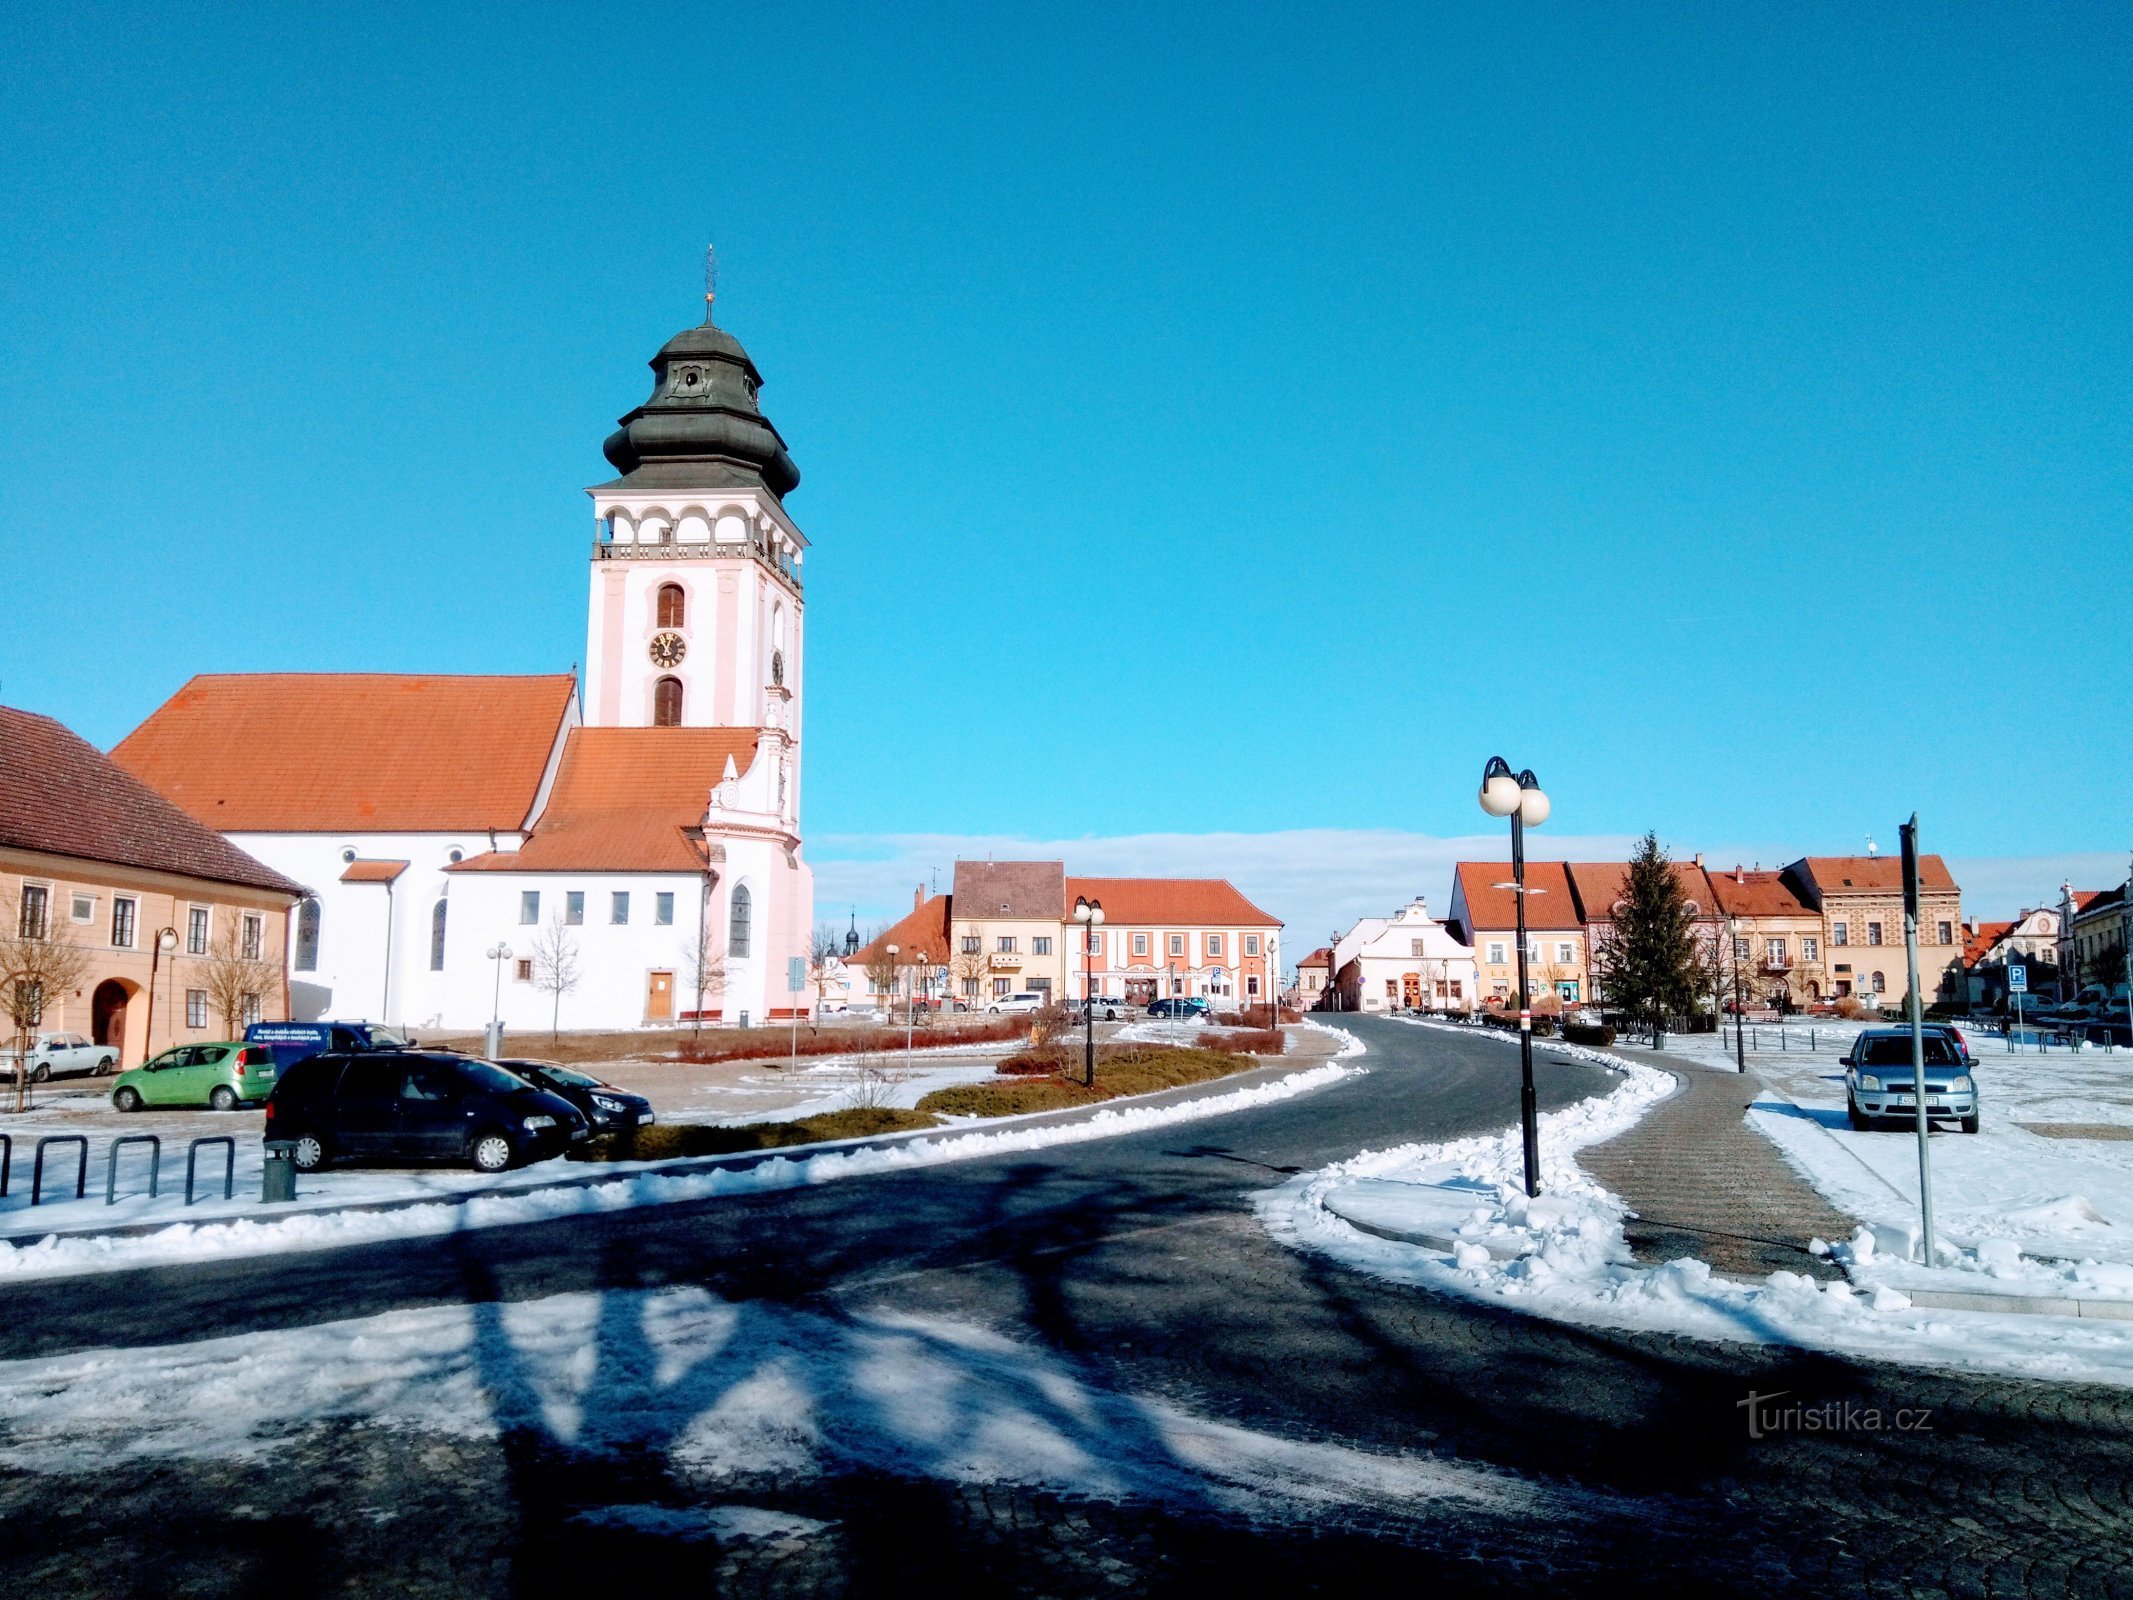 The square with the church of St. Matej